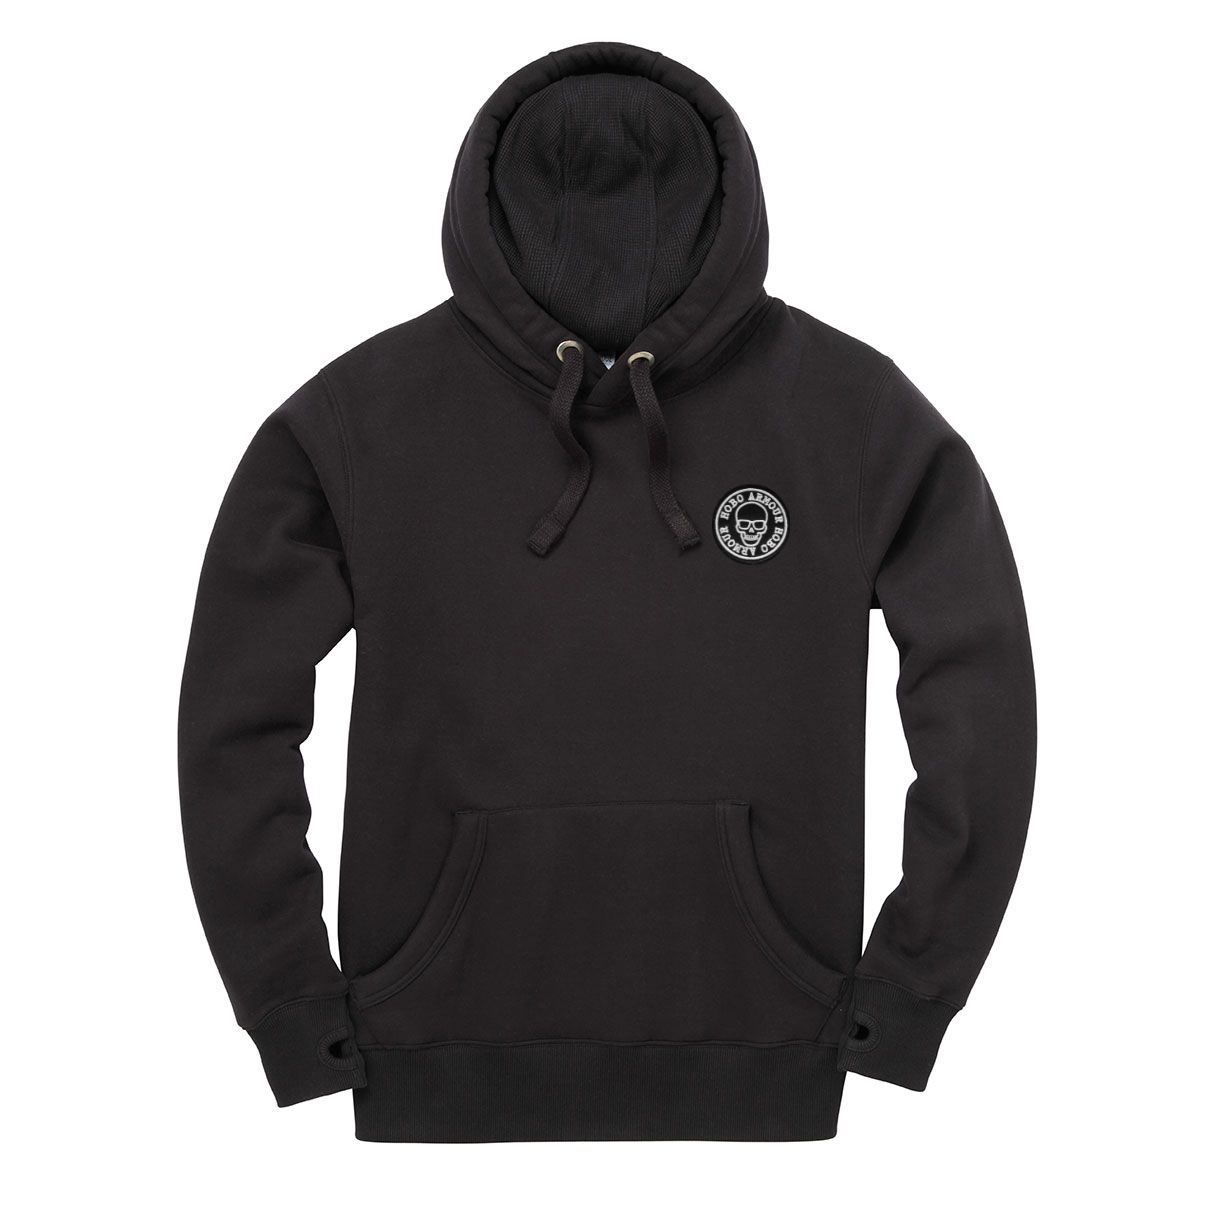 Black Patched Winter Stash Hoody